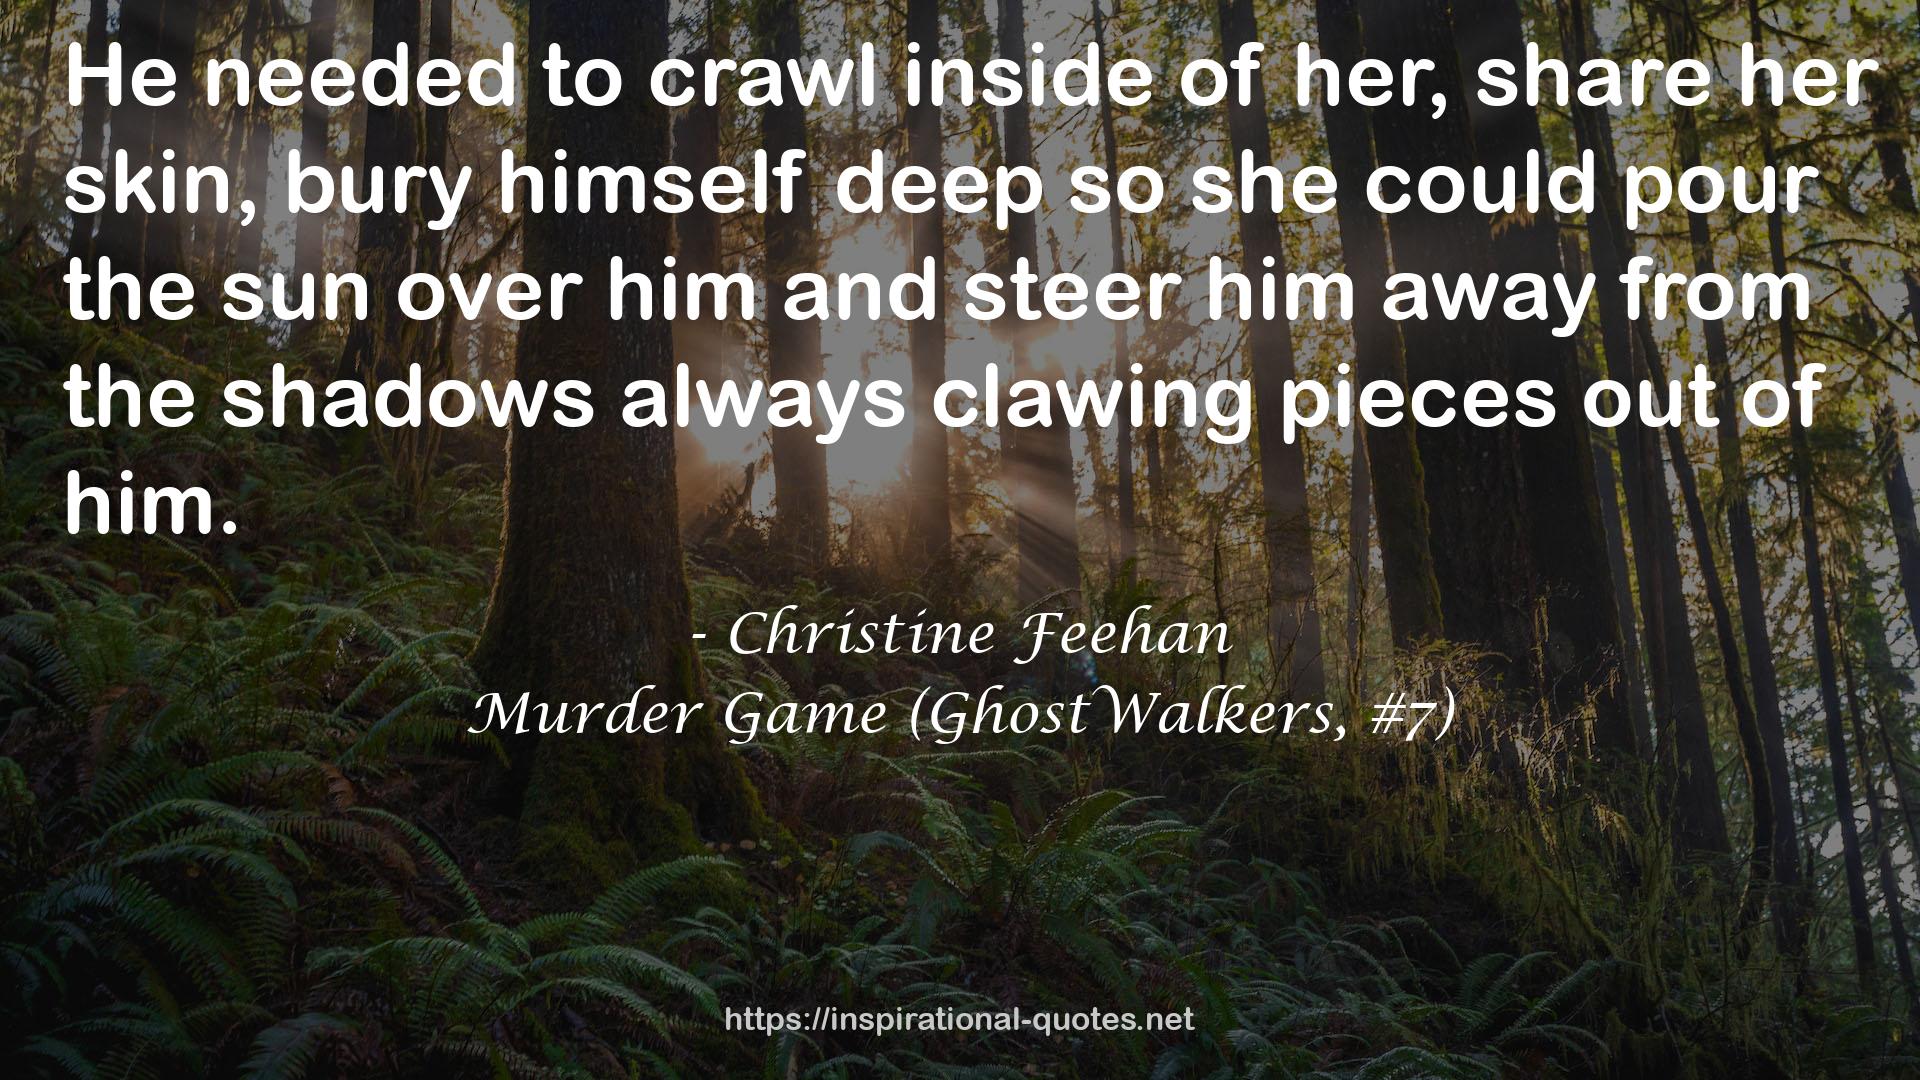 Murder Game (GhostWalkers, #7) QUOTES